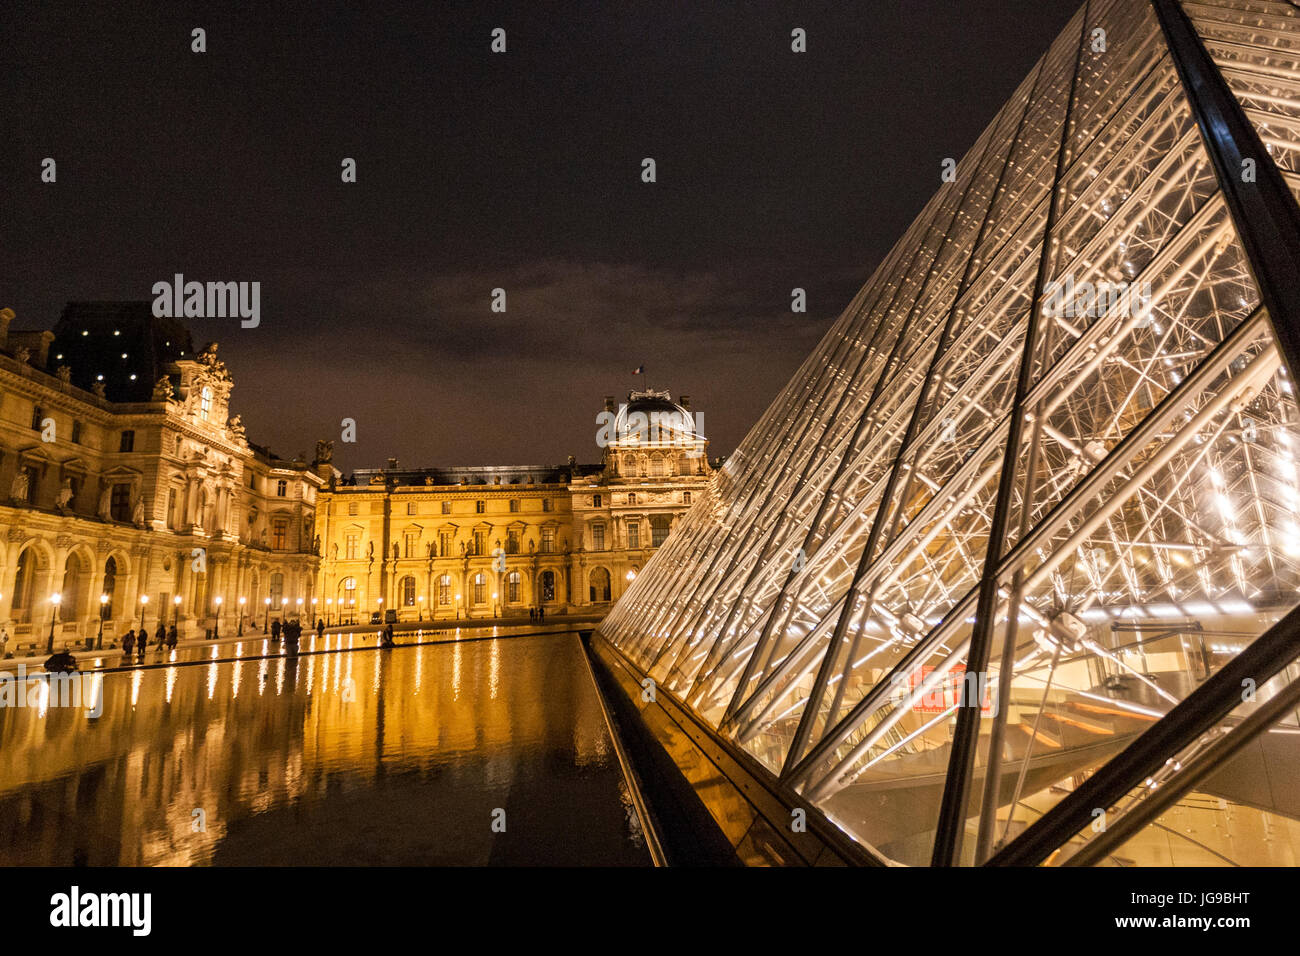 Louvre museum and Louvre Pyramid, architect I.M. Pei, at night, Paris, France Stock Photo